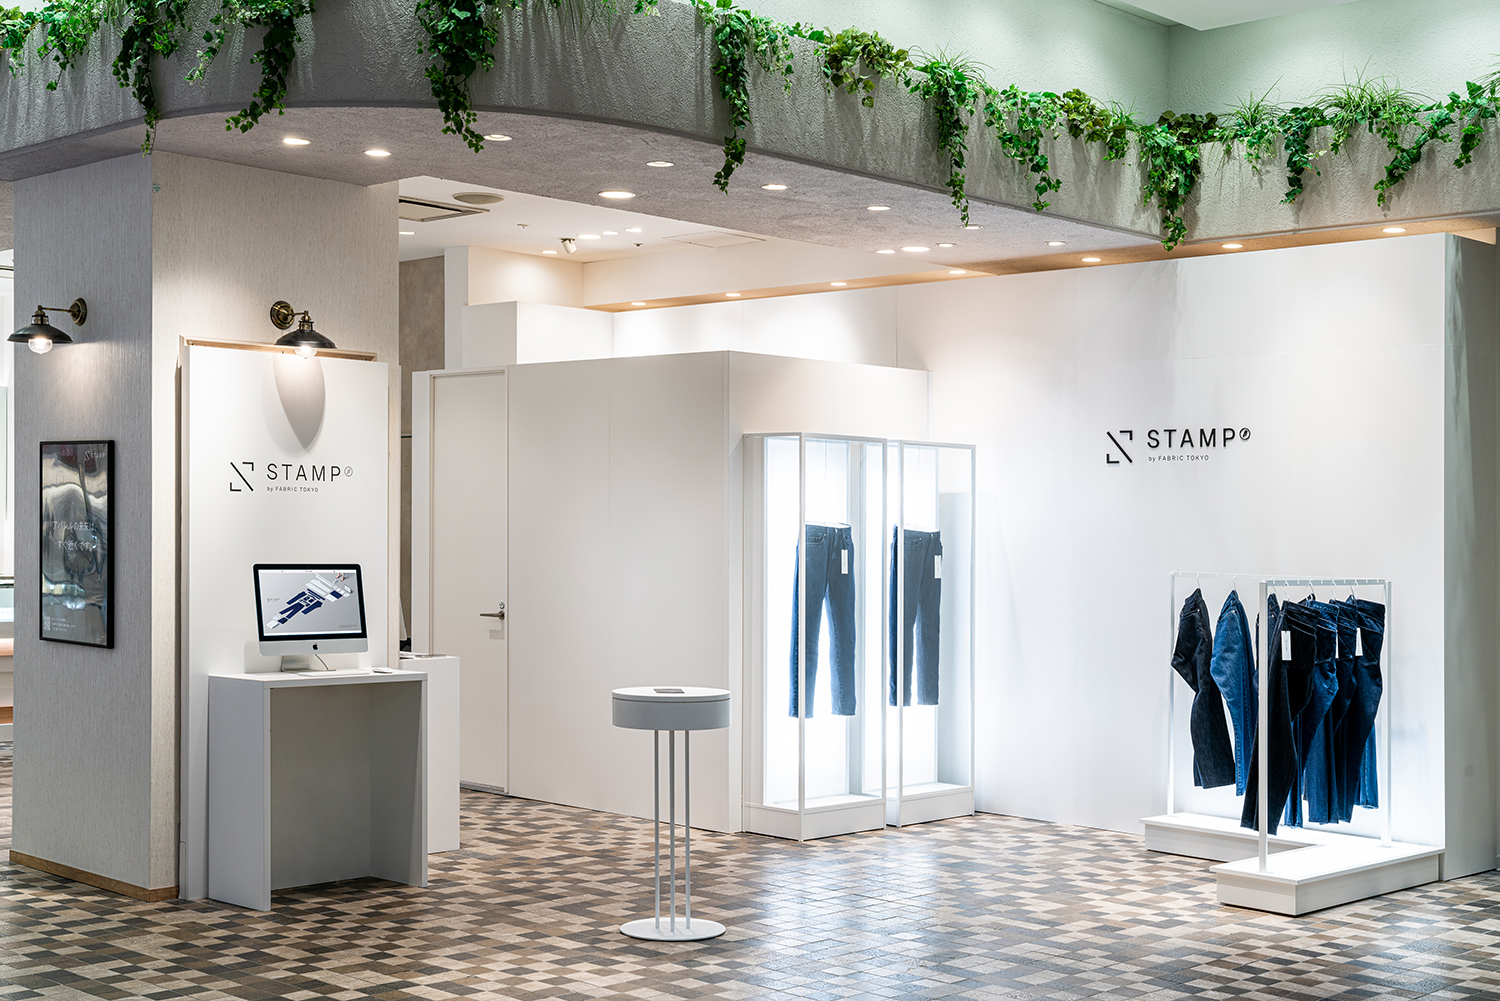 STAMP pop-up shop opened on the 1st floor of Shinjuku Marui main building